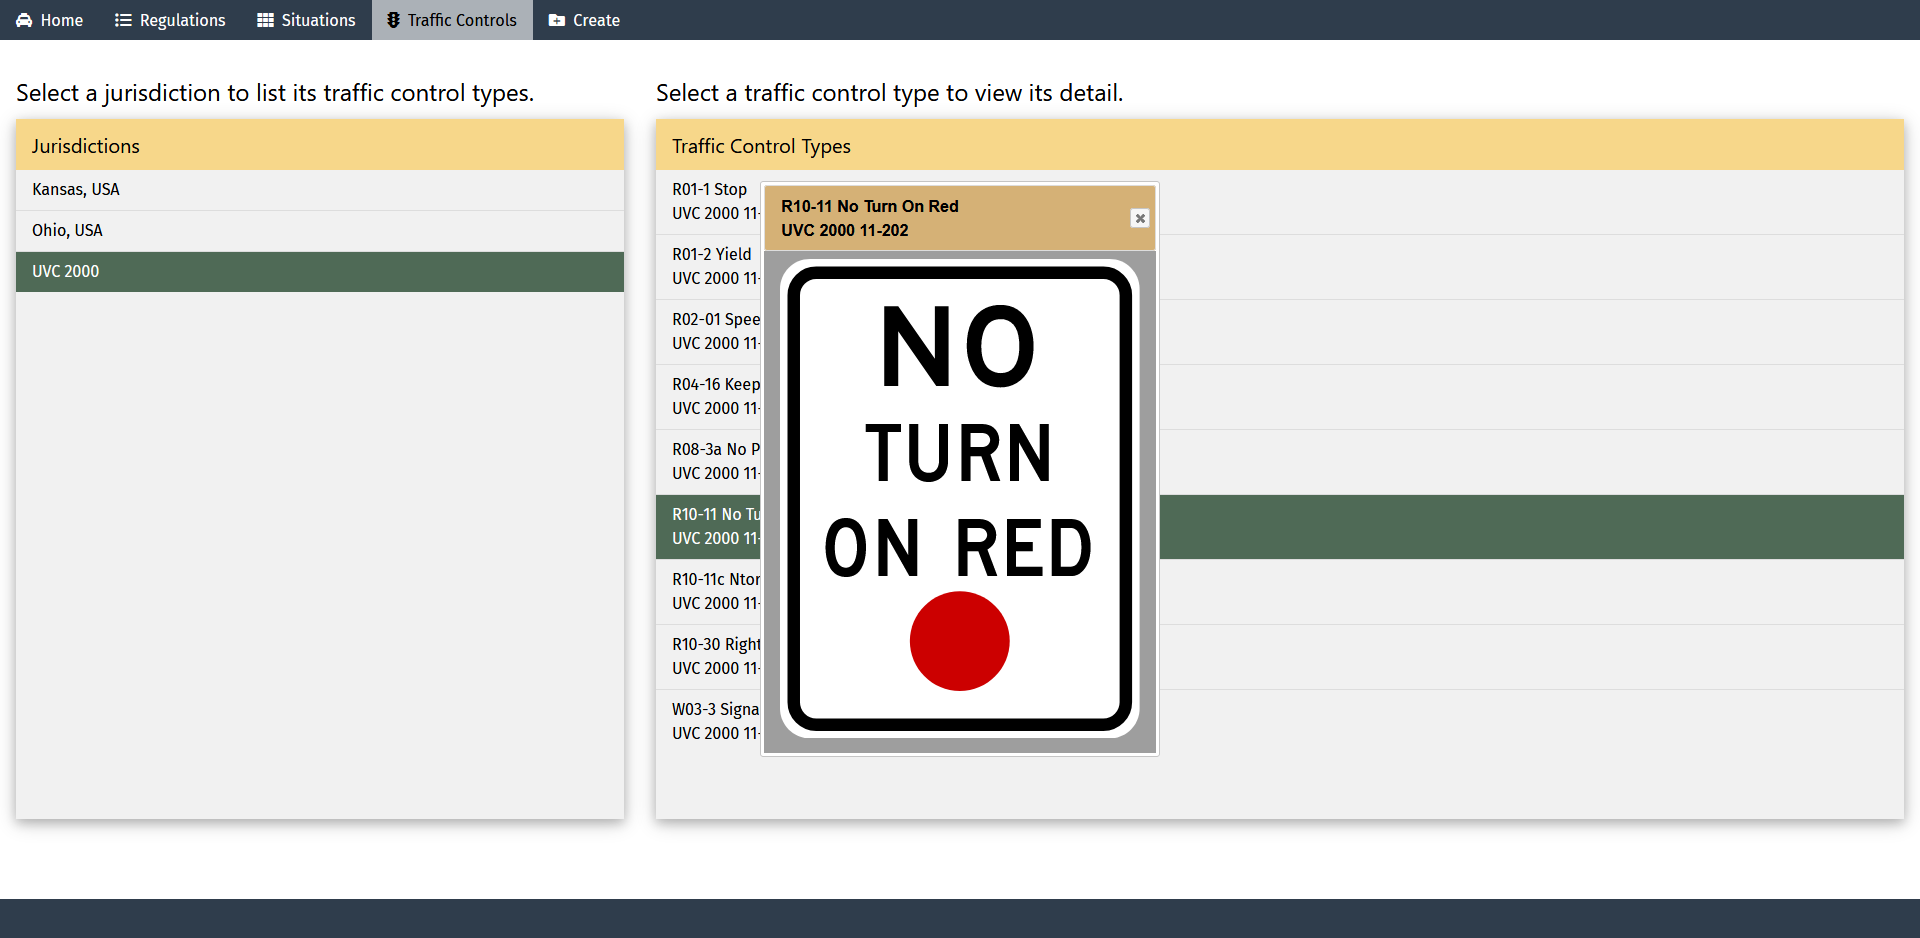 Screen capture of an automated driving systems regulations network page depicting the traffic control device associated with the selected traffic control tyupe; in this case, a No Turn on Red warning sign.